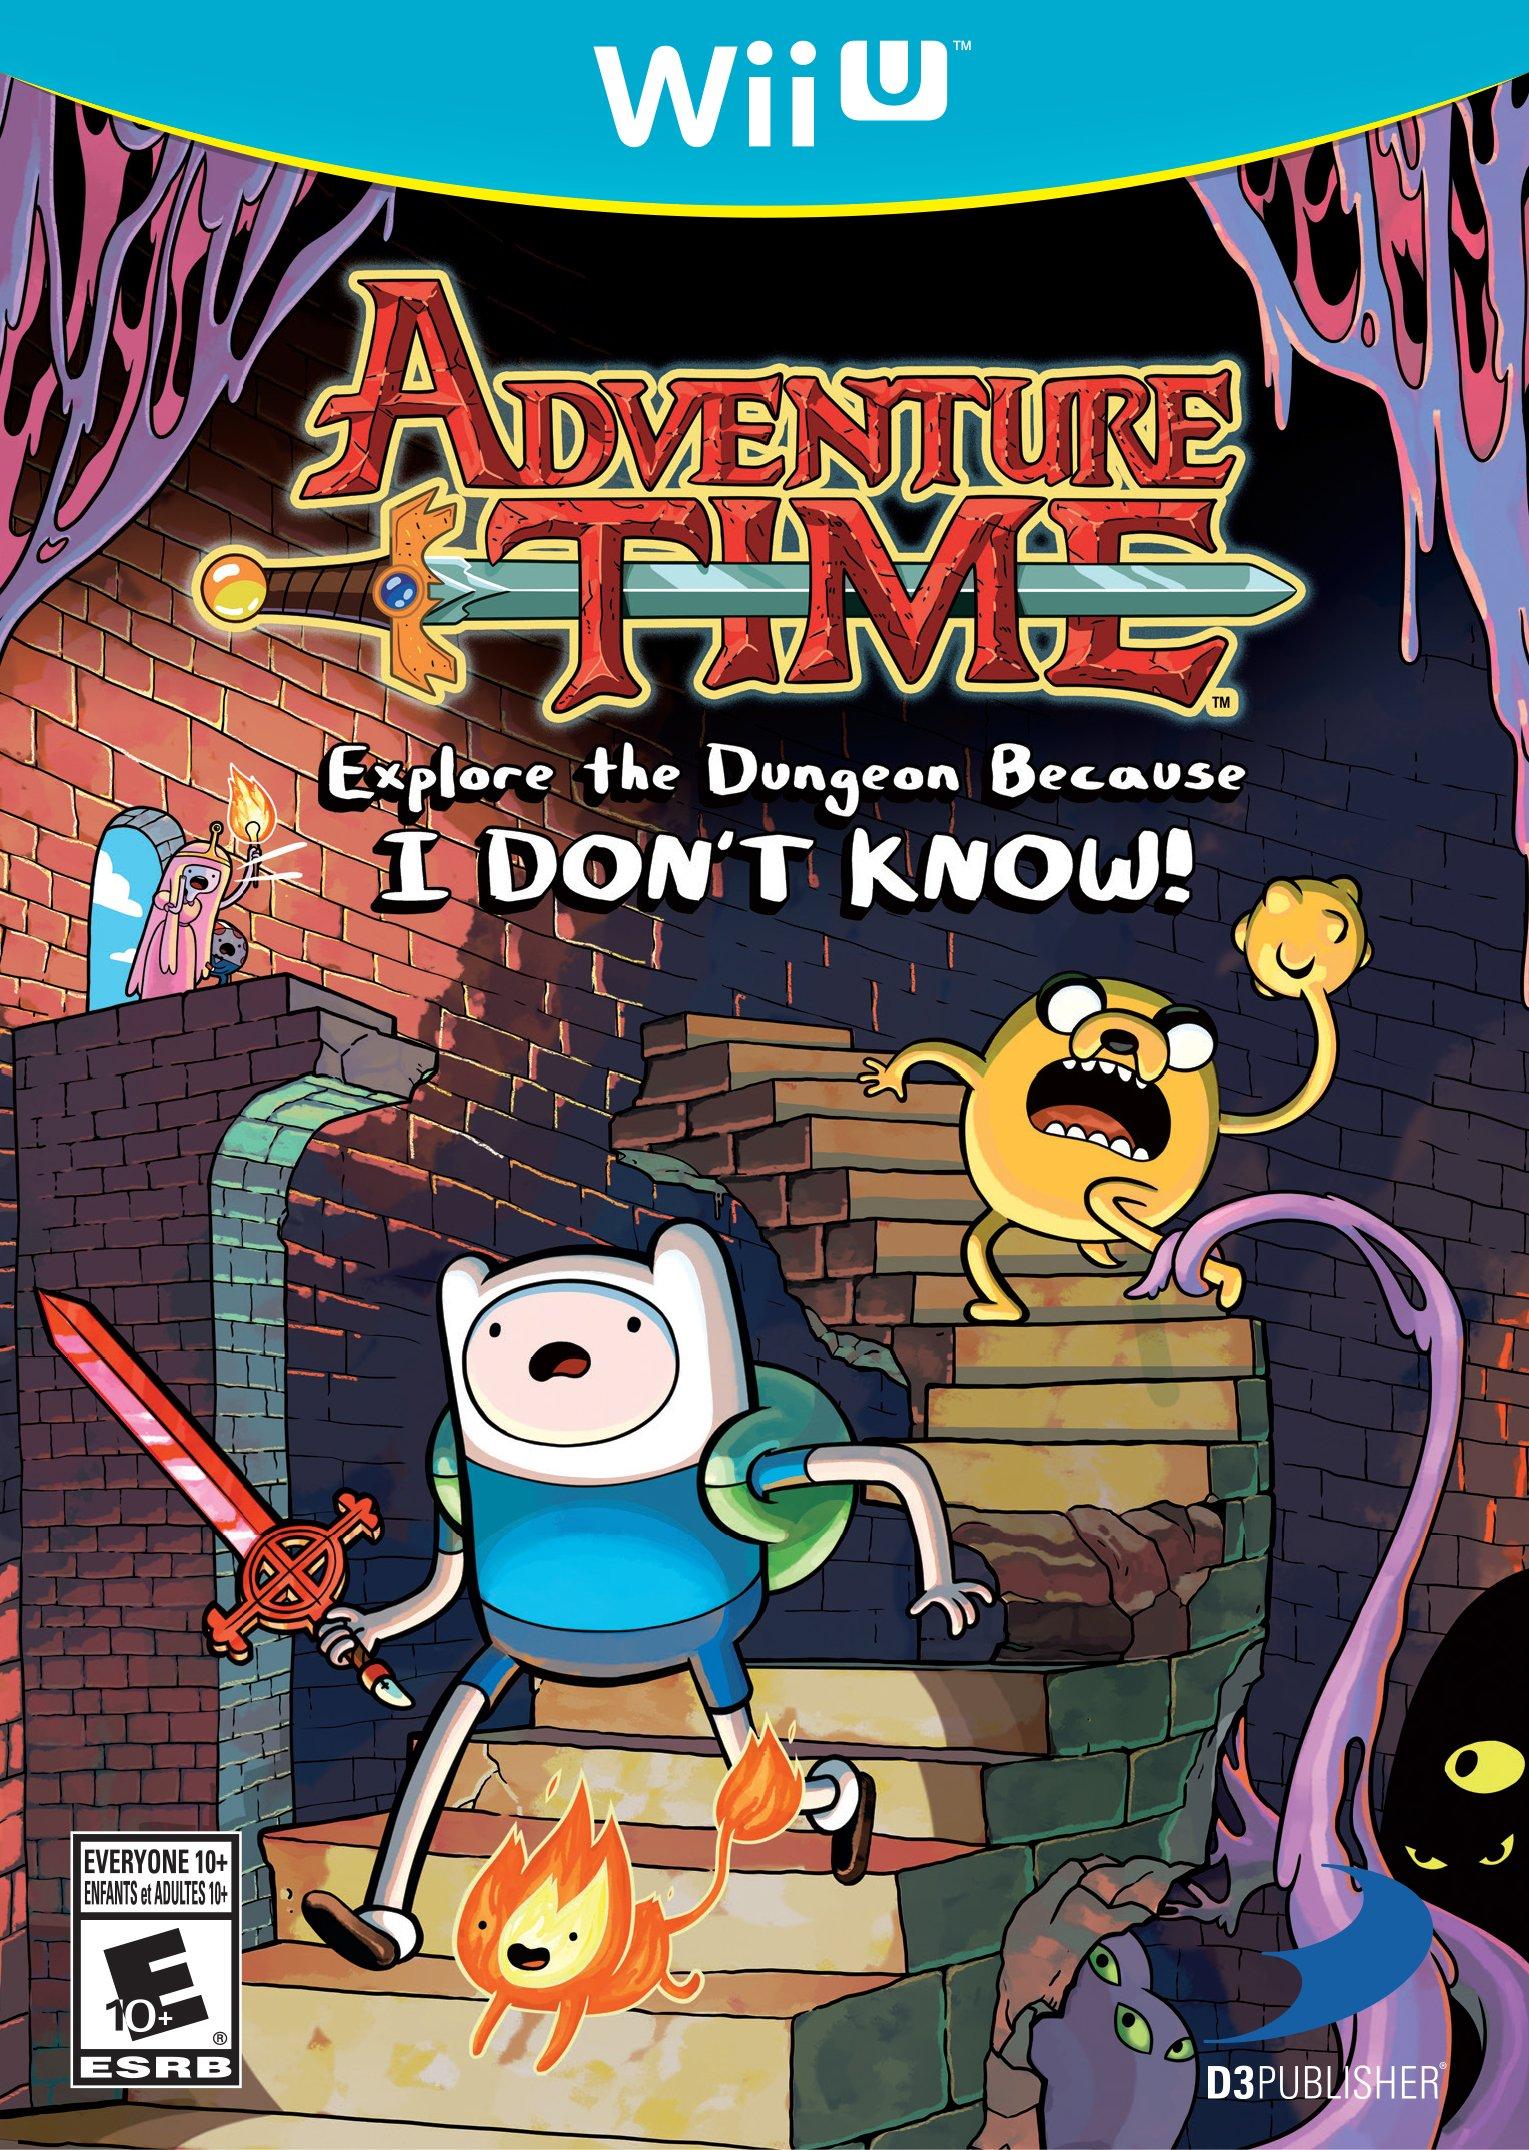 Six mathematical apps for Adventure Time fans